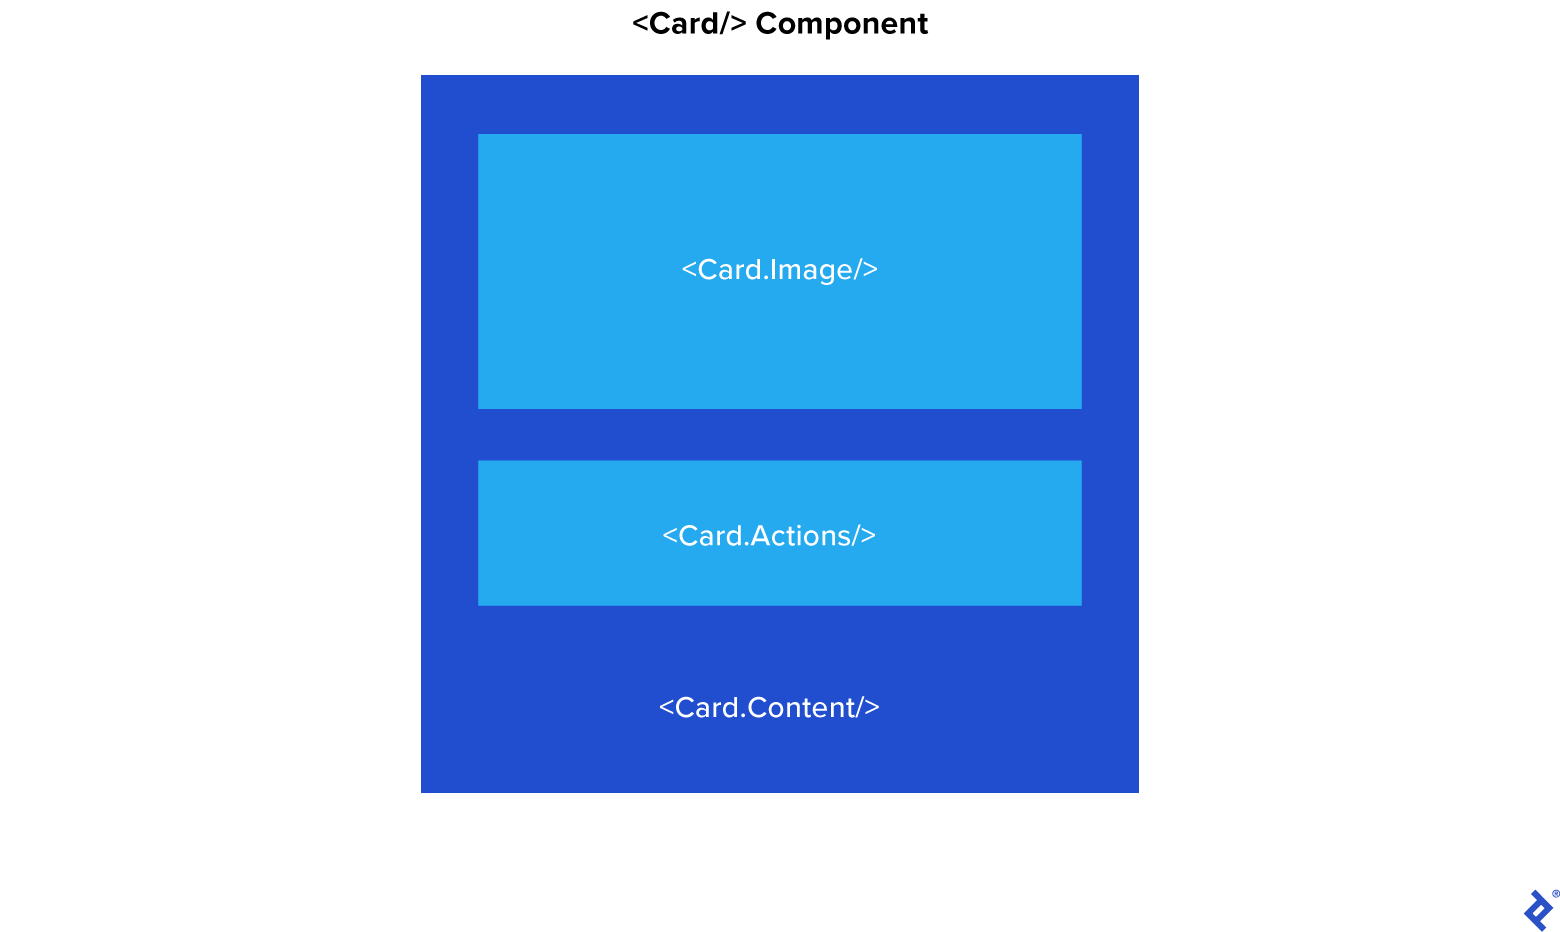 A card component composed of three rectangles, representing elements labeled Card.Image, Card.Actions, and Card.Content.